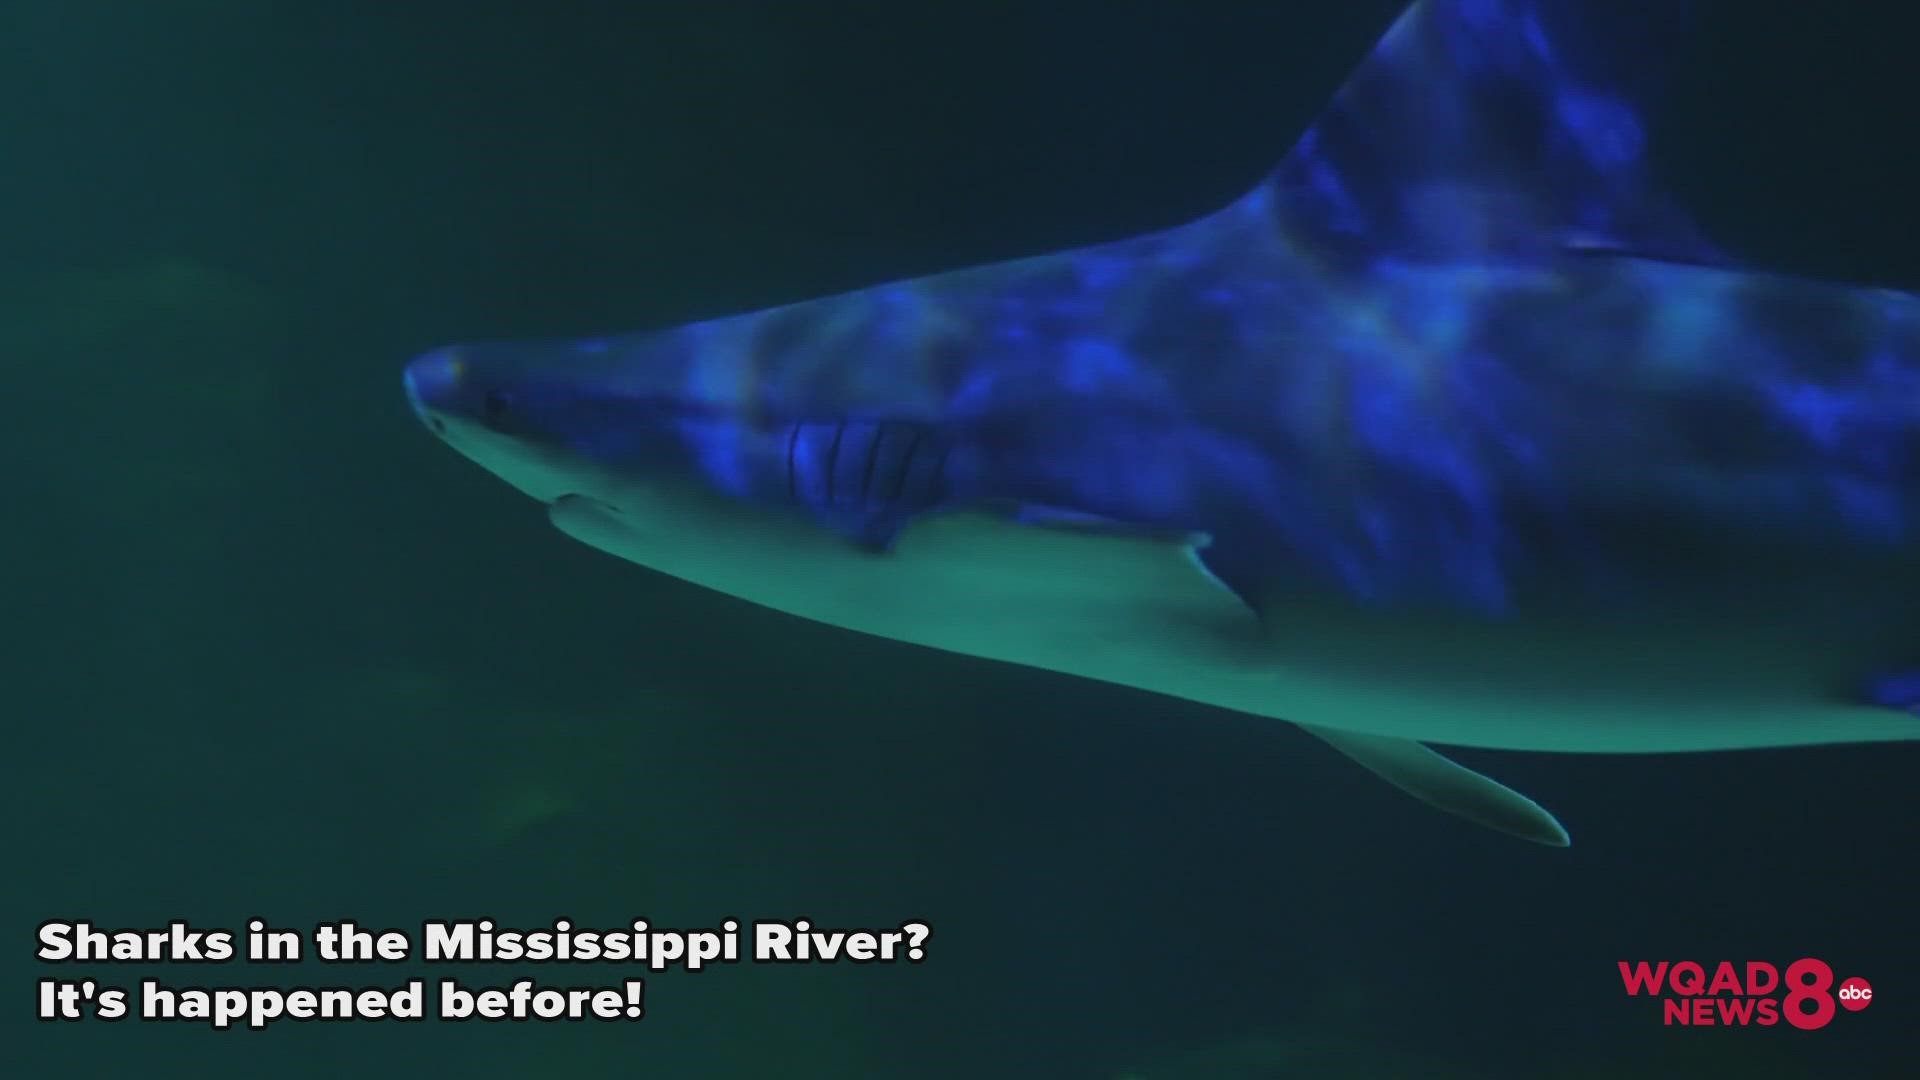 There have been at least two known sightings of bull sharks in the Mississippi River since the 1930s